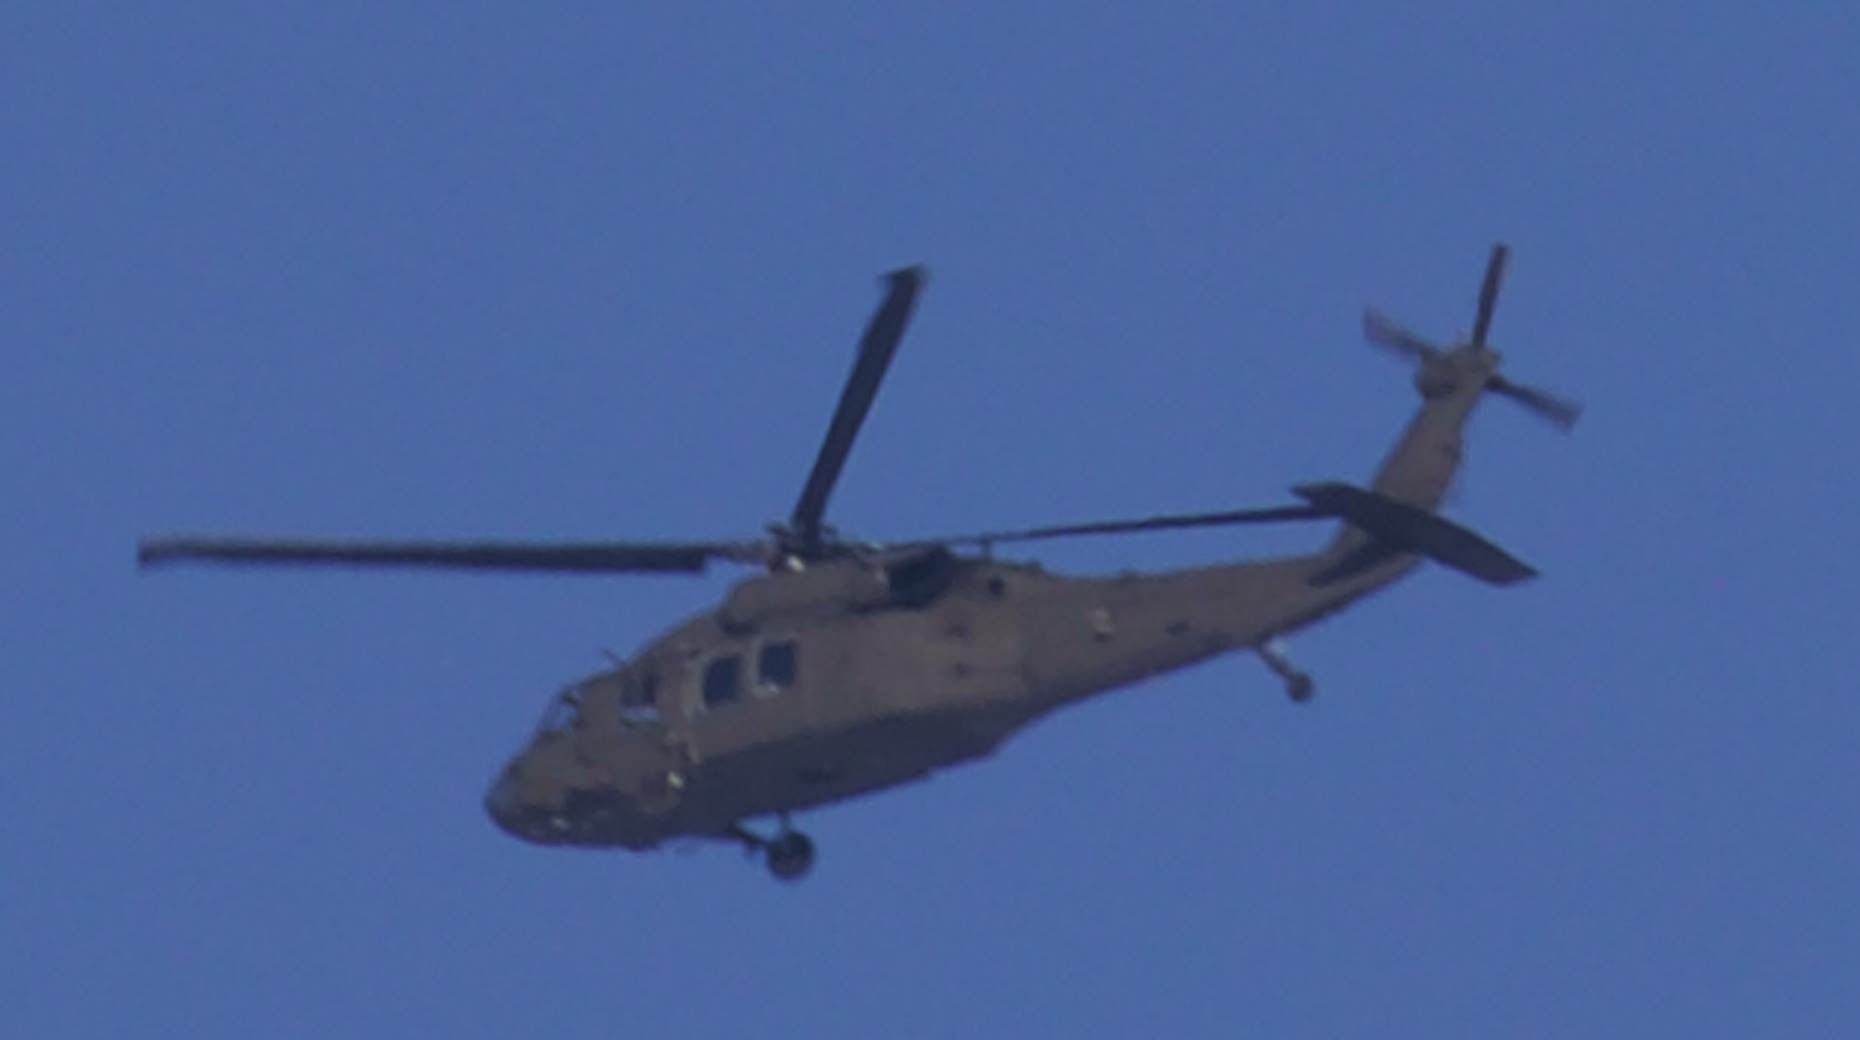 Black helicopter flying over the Standing Rock camps - photo provided by Myron Dewey